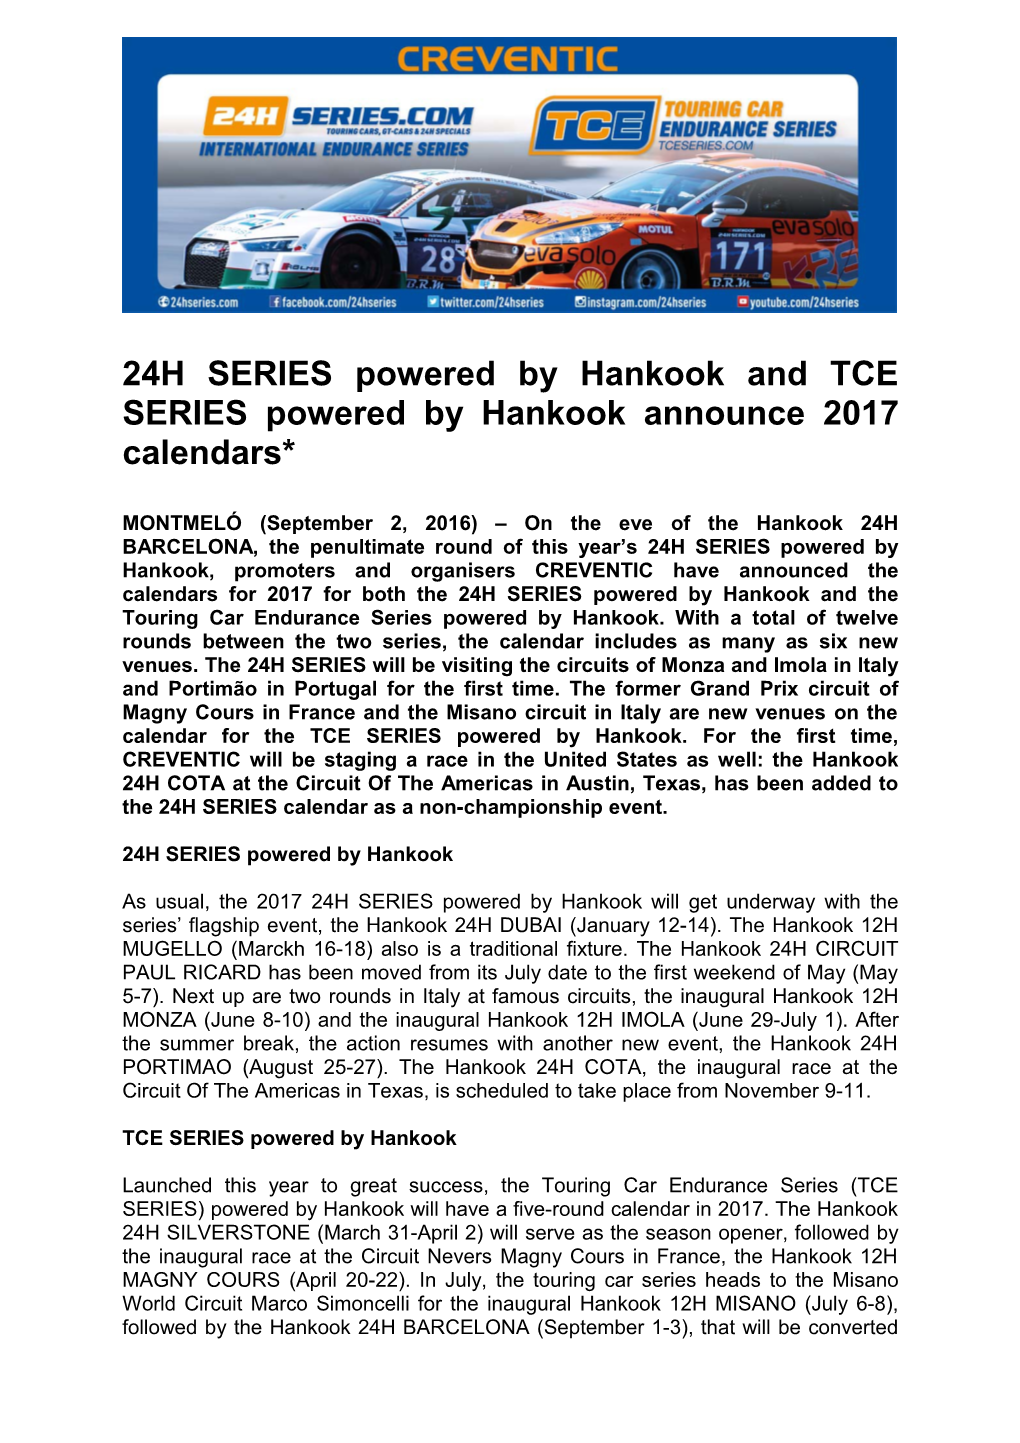 24H SERIES Powered by Hankook and TCE SERIES Powered by Hankook Announce 2017 Calendars*